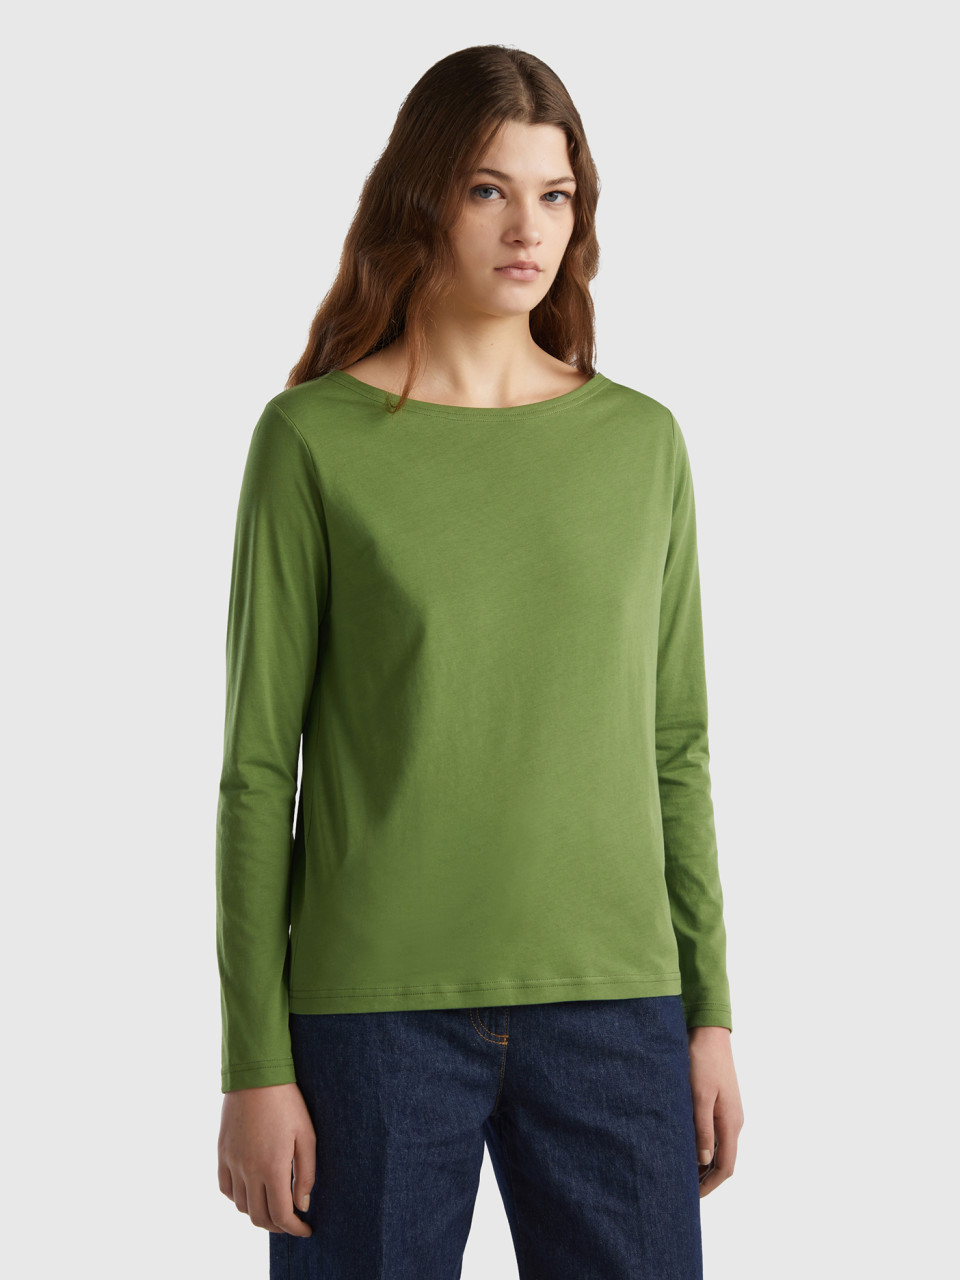 Benetton, T-shirt With Boat Neck In 100% Cotton, Military Green, Women